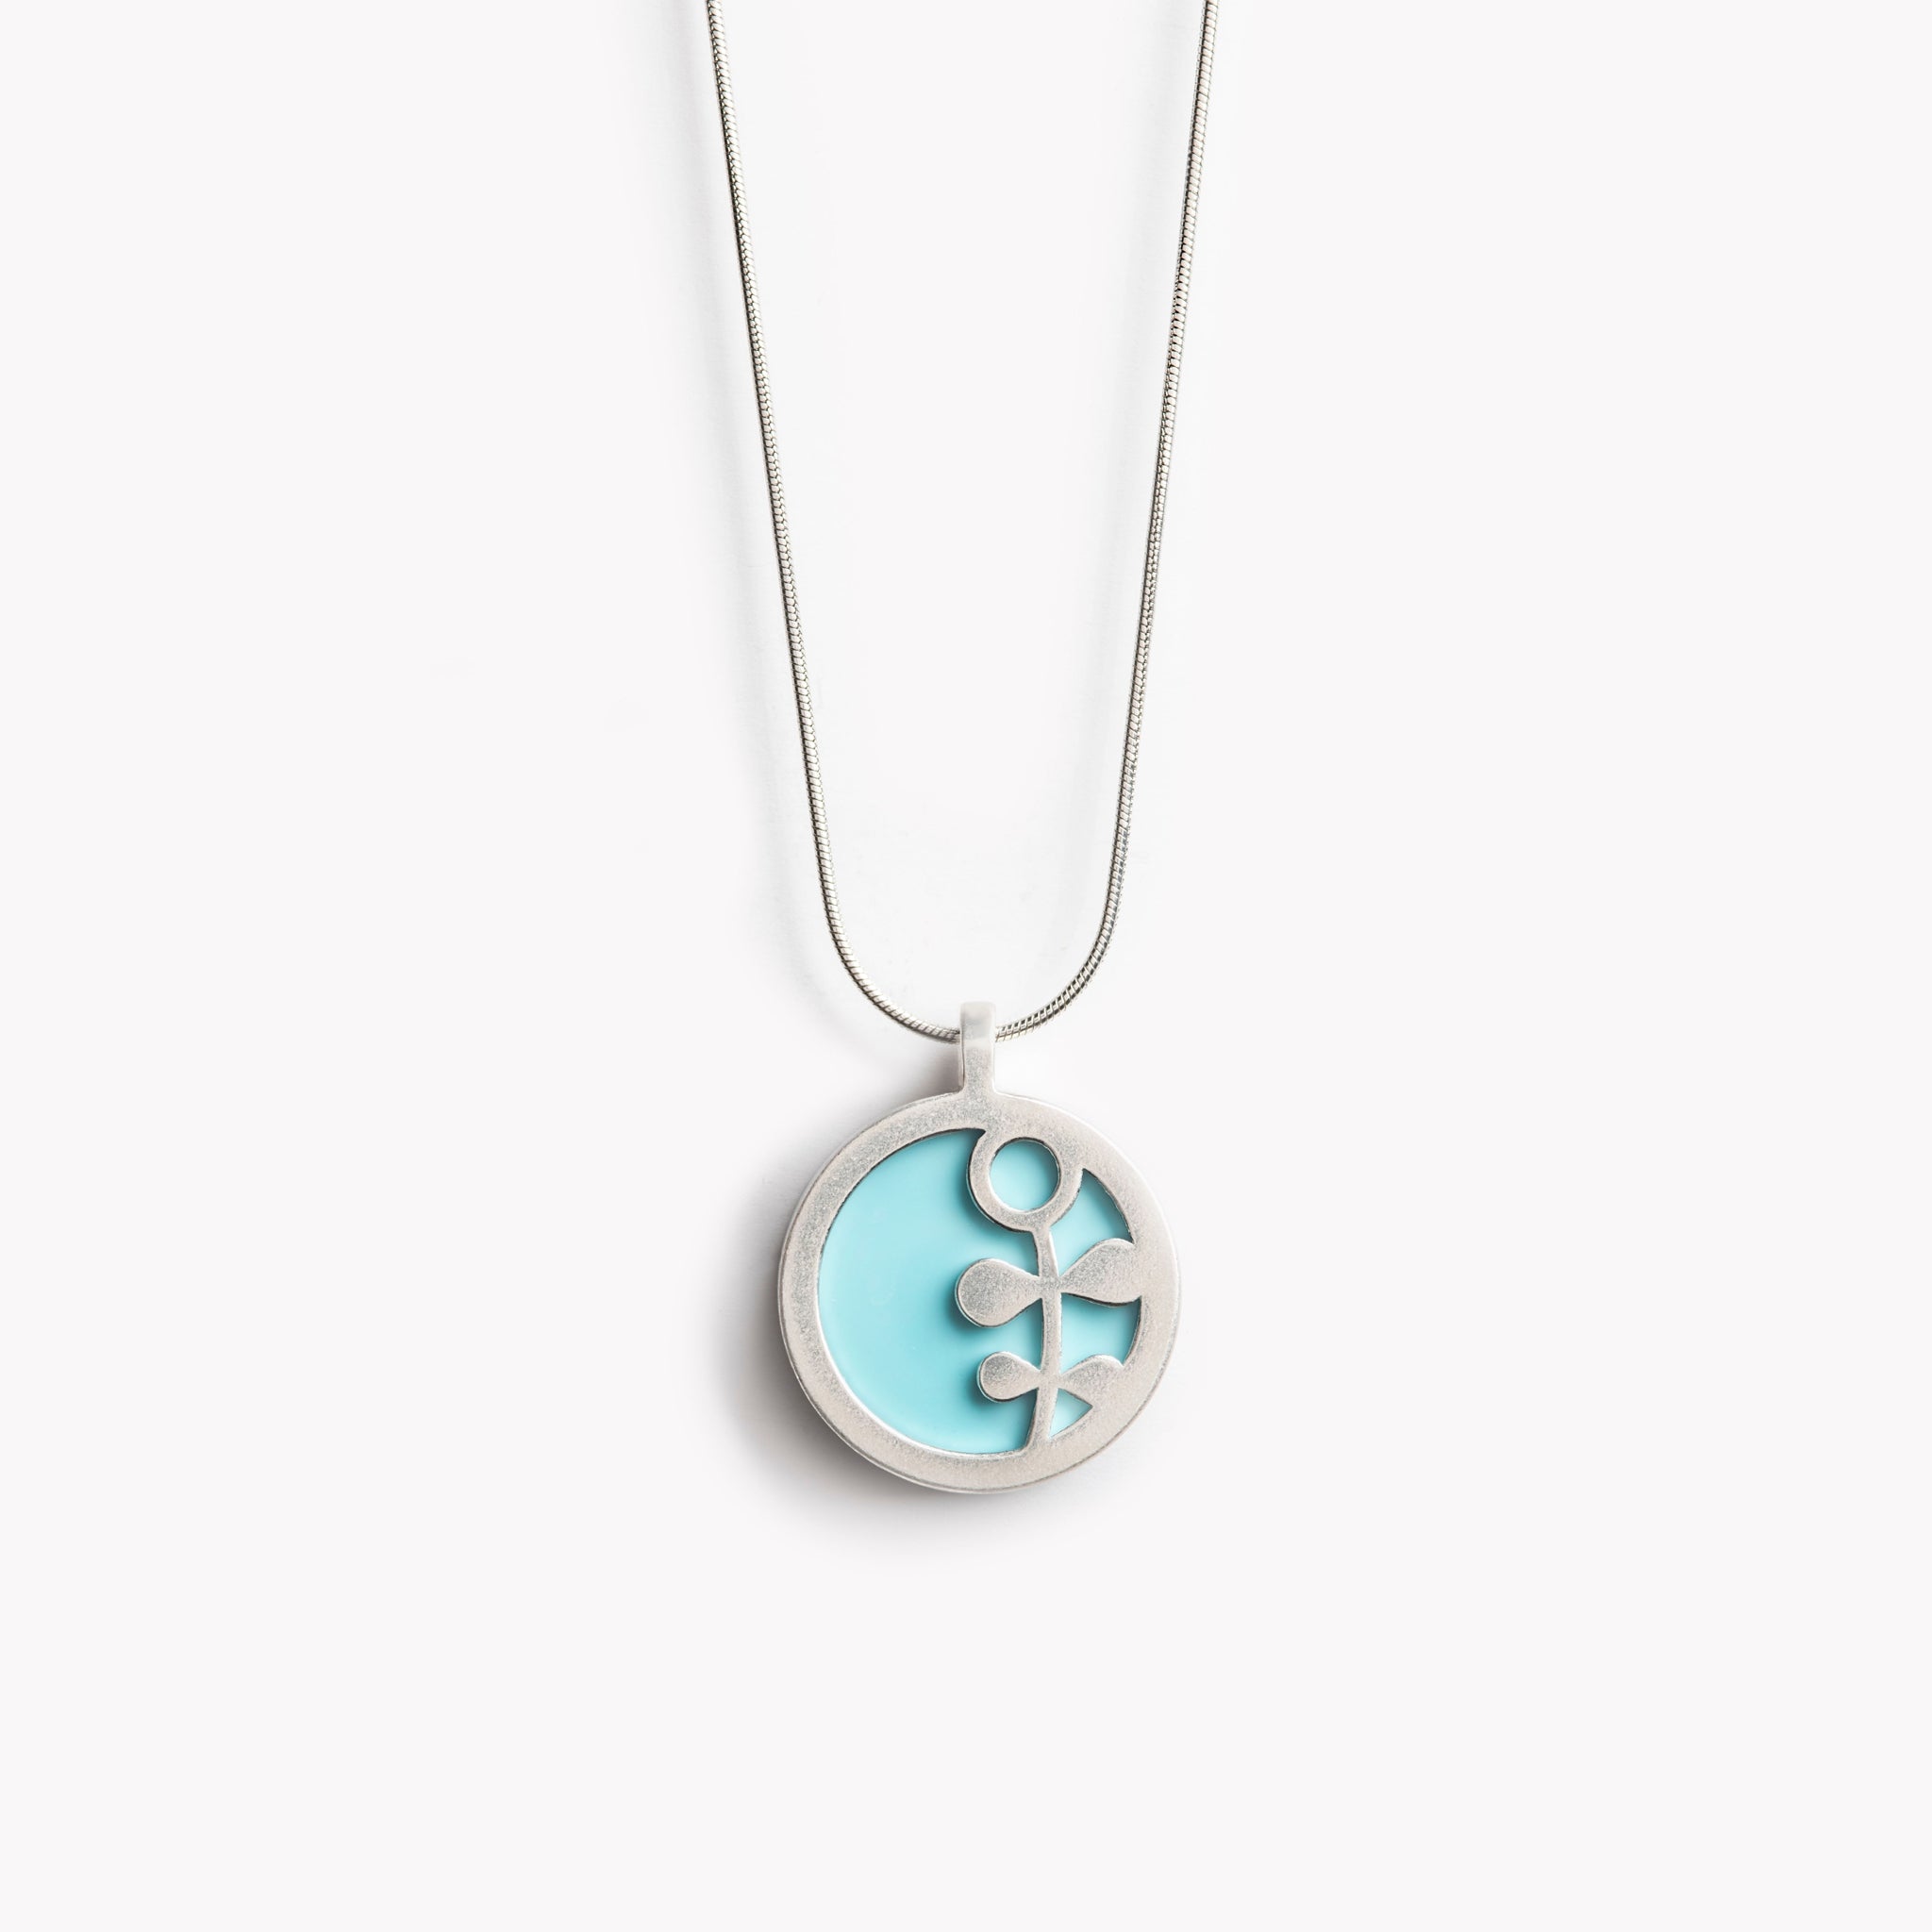 The image shows a circular pendant with a simple Scandinavian style flower stem design.  It has a pale turquoise inset which is surrounded by brightly polished pewter, with the flower  stem also highlighted in polished pewter. The pendant is bathed in sunlight on a crisp white  background. This is a simple yet vibrant, modern and colourful pendant necklace design.